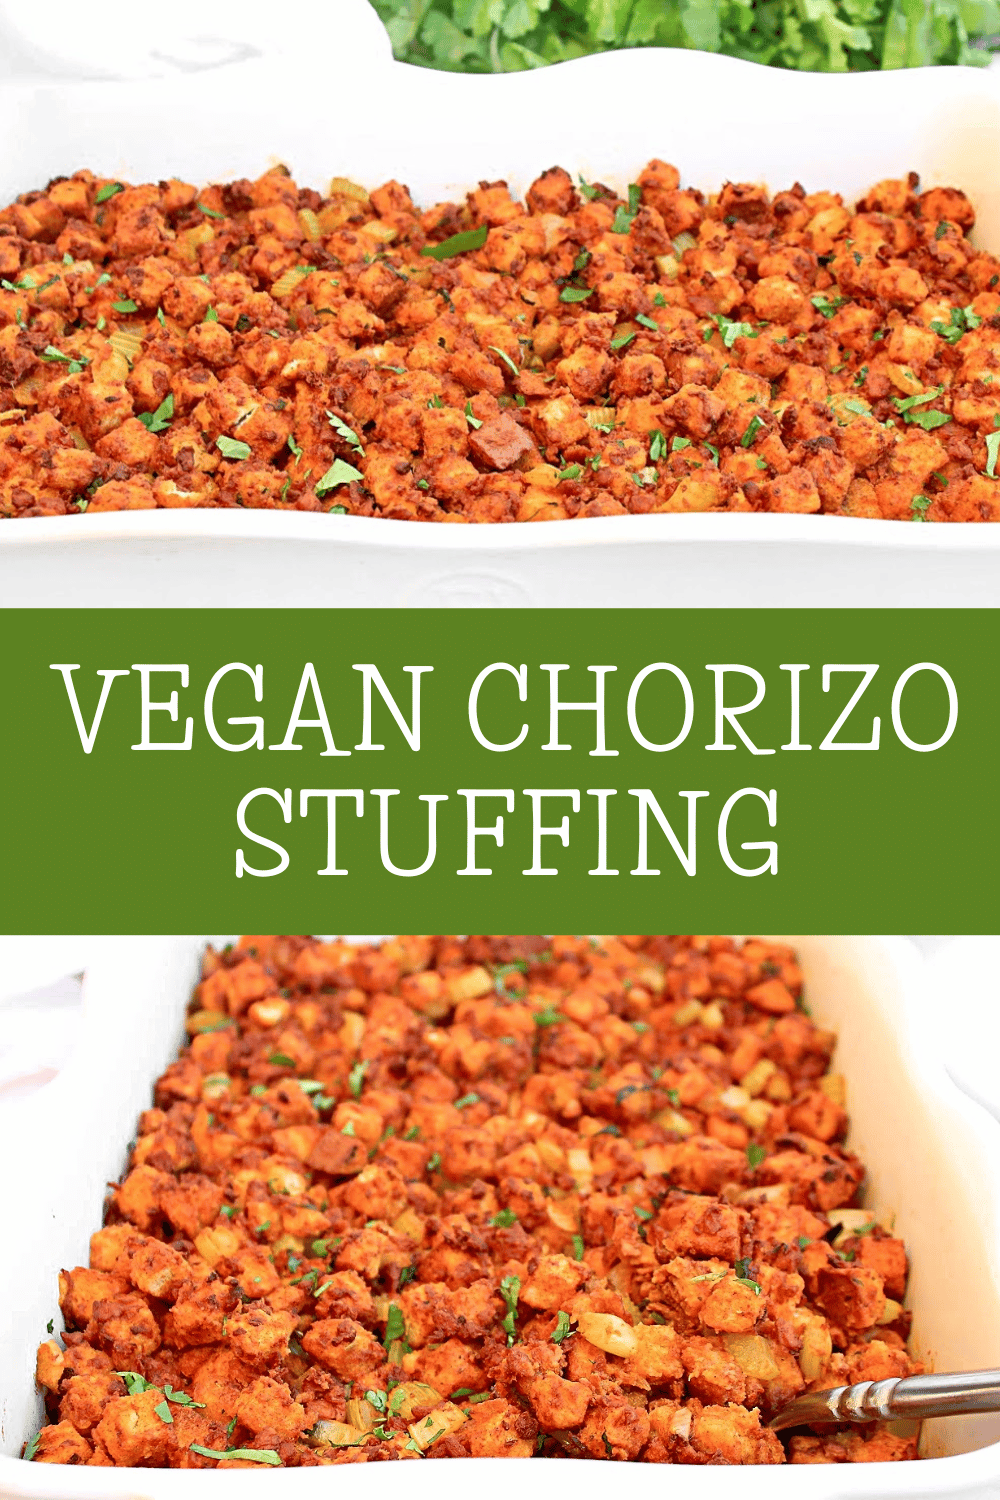 Vegan Chorizo Stuffing ~ Add Mexican flair to your plant-based Thanksgiving feast! This stuffing is smoky, savory, and loaded with bold flavor.  via @thiswifecooks